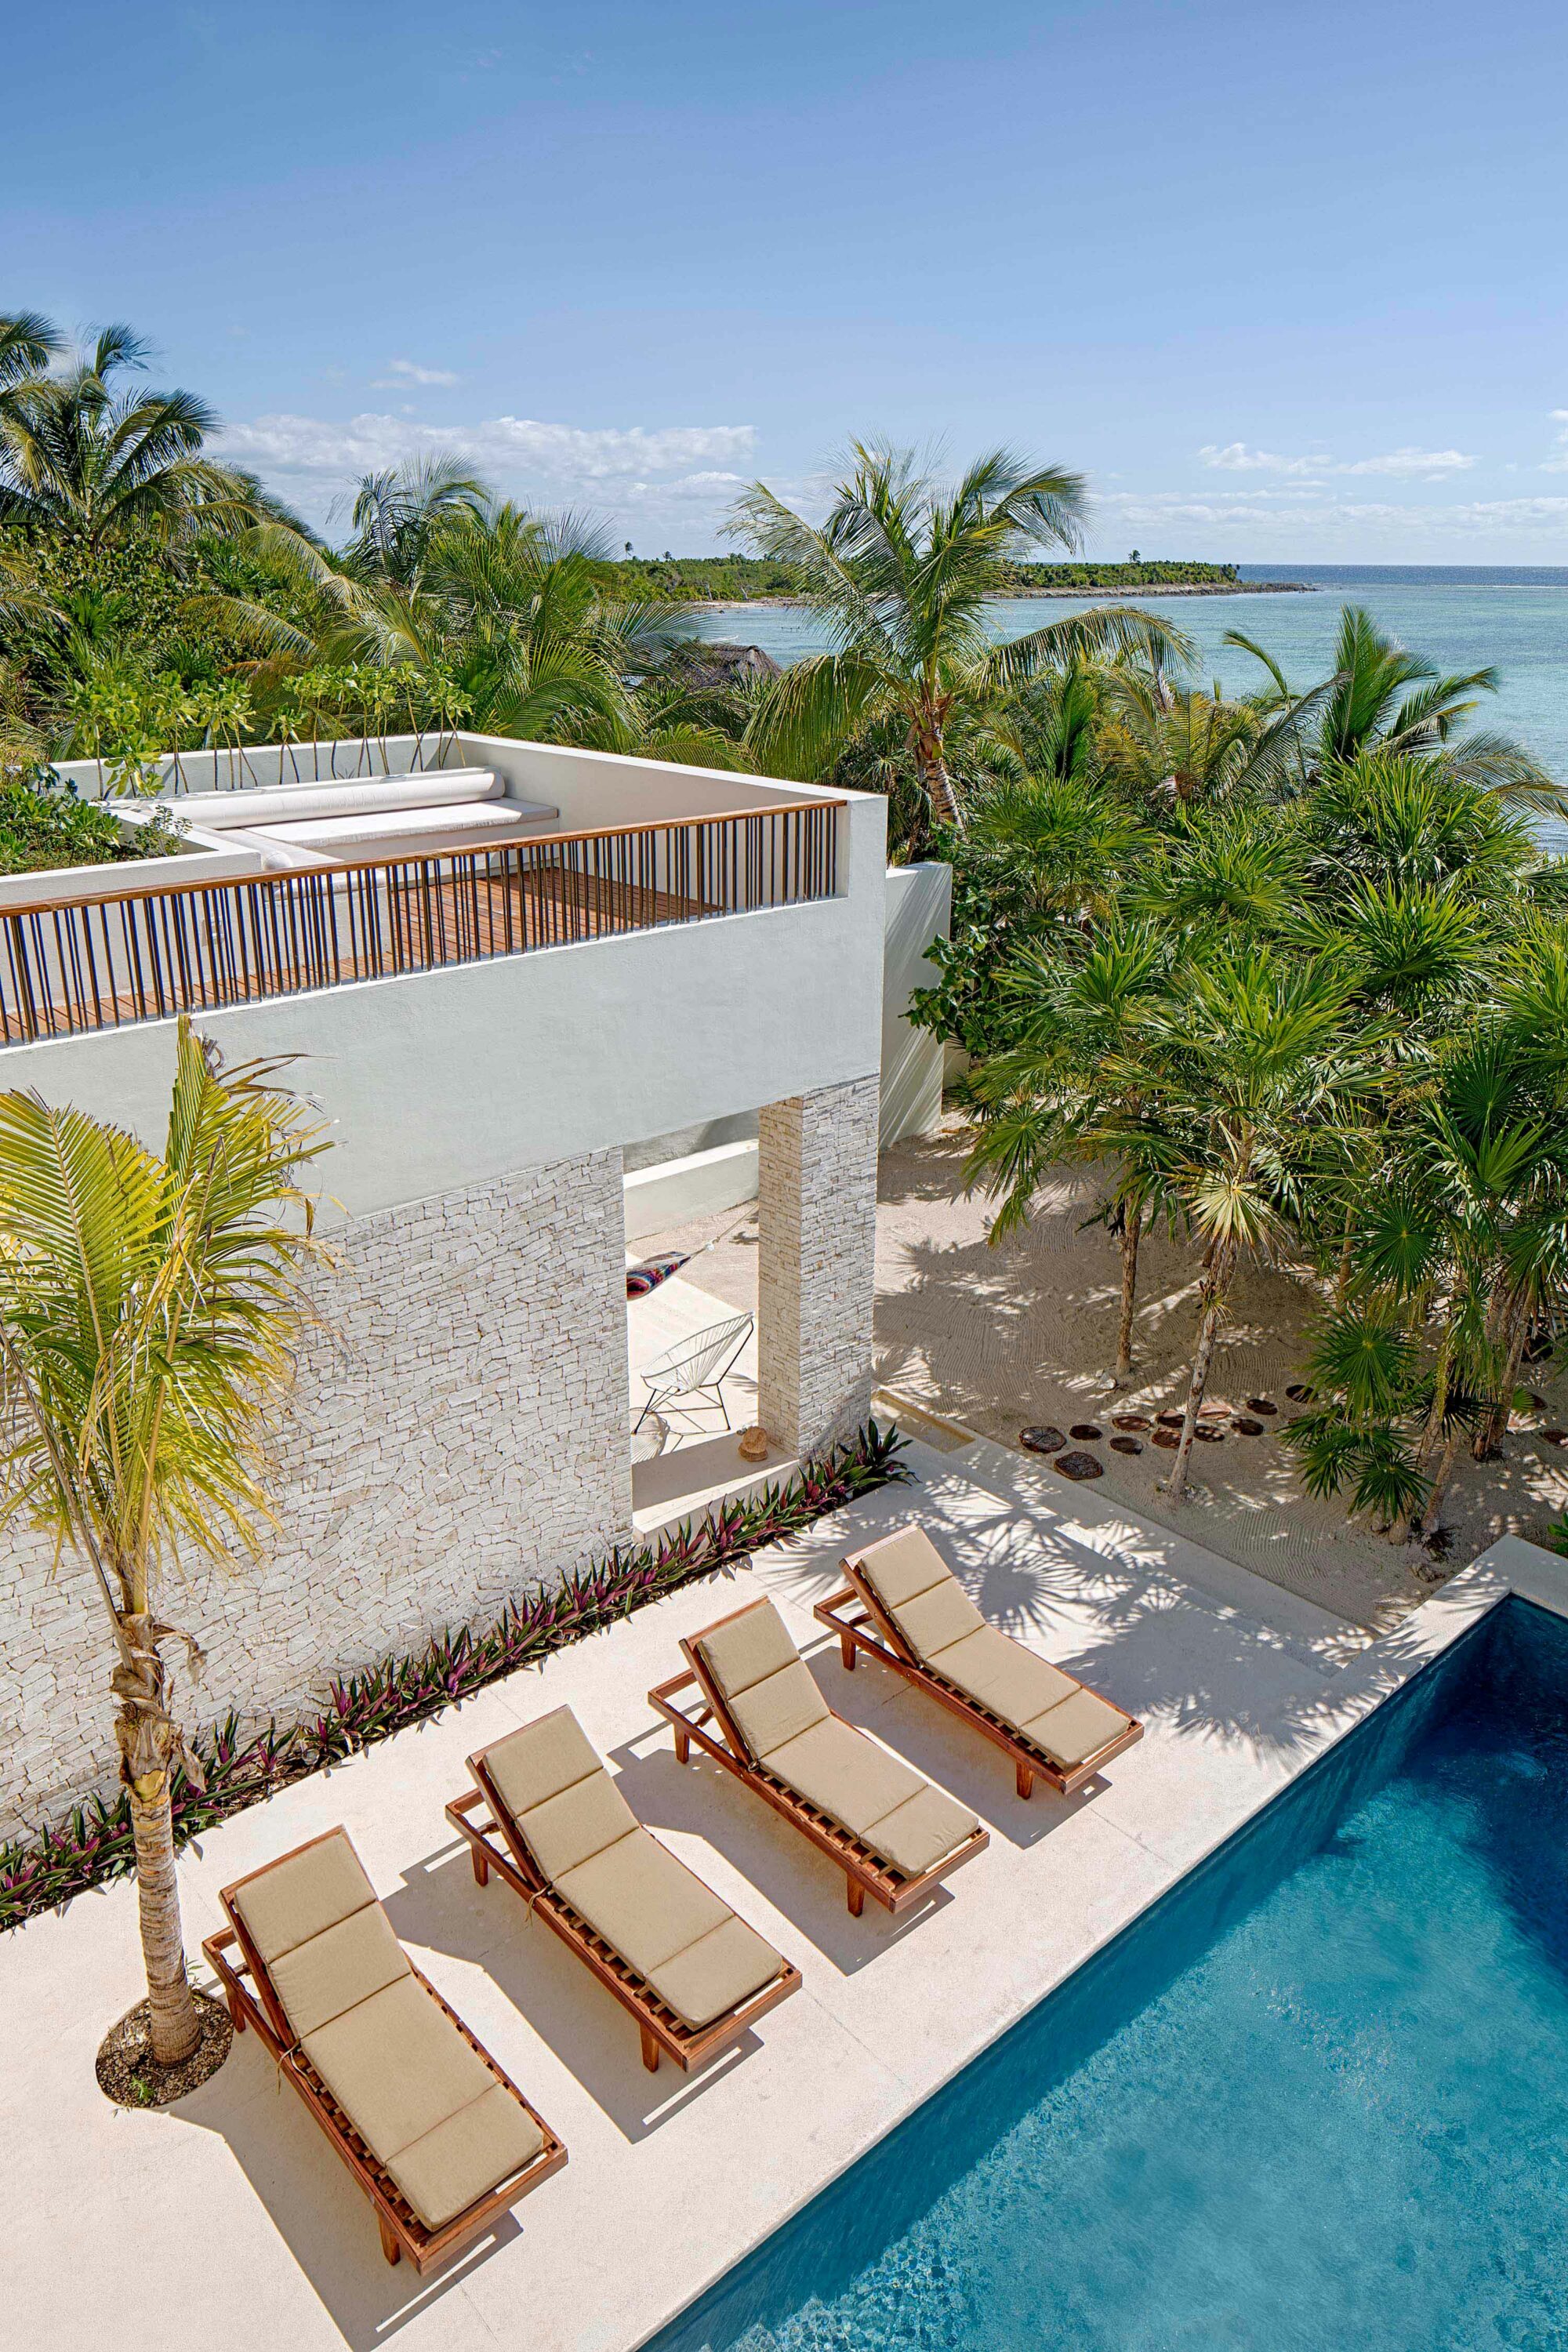 Exterior photo of Casa Xixim by Specht Novak Architects. Shot by Taggart Sorensen, featuring the pool, lounging area, and silhouette of the home from above, with view of the ocean.